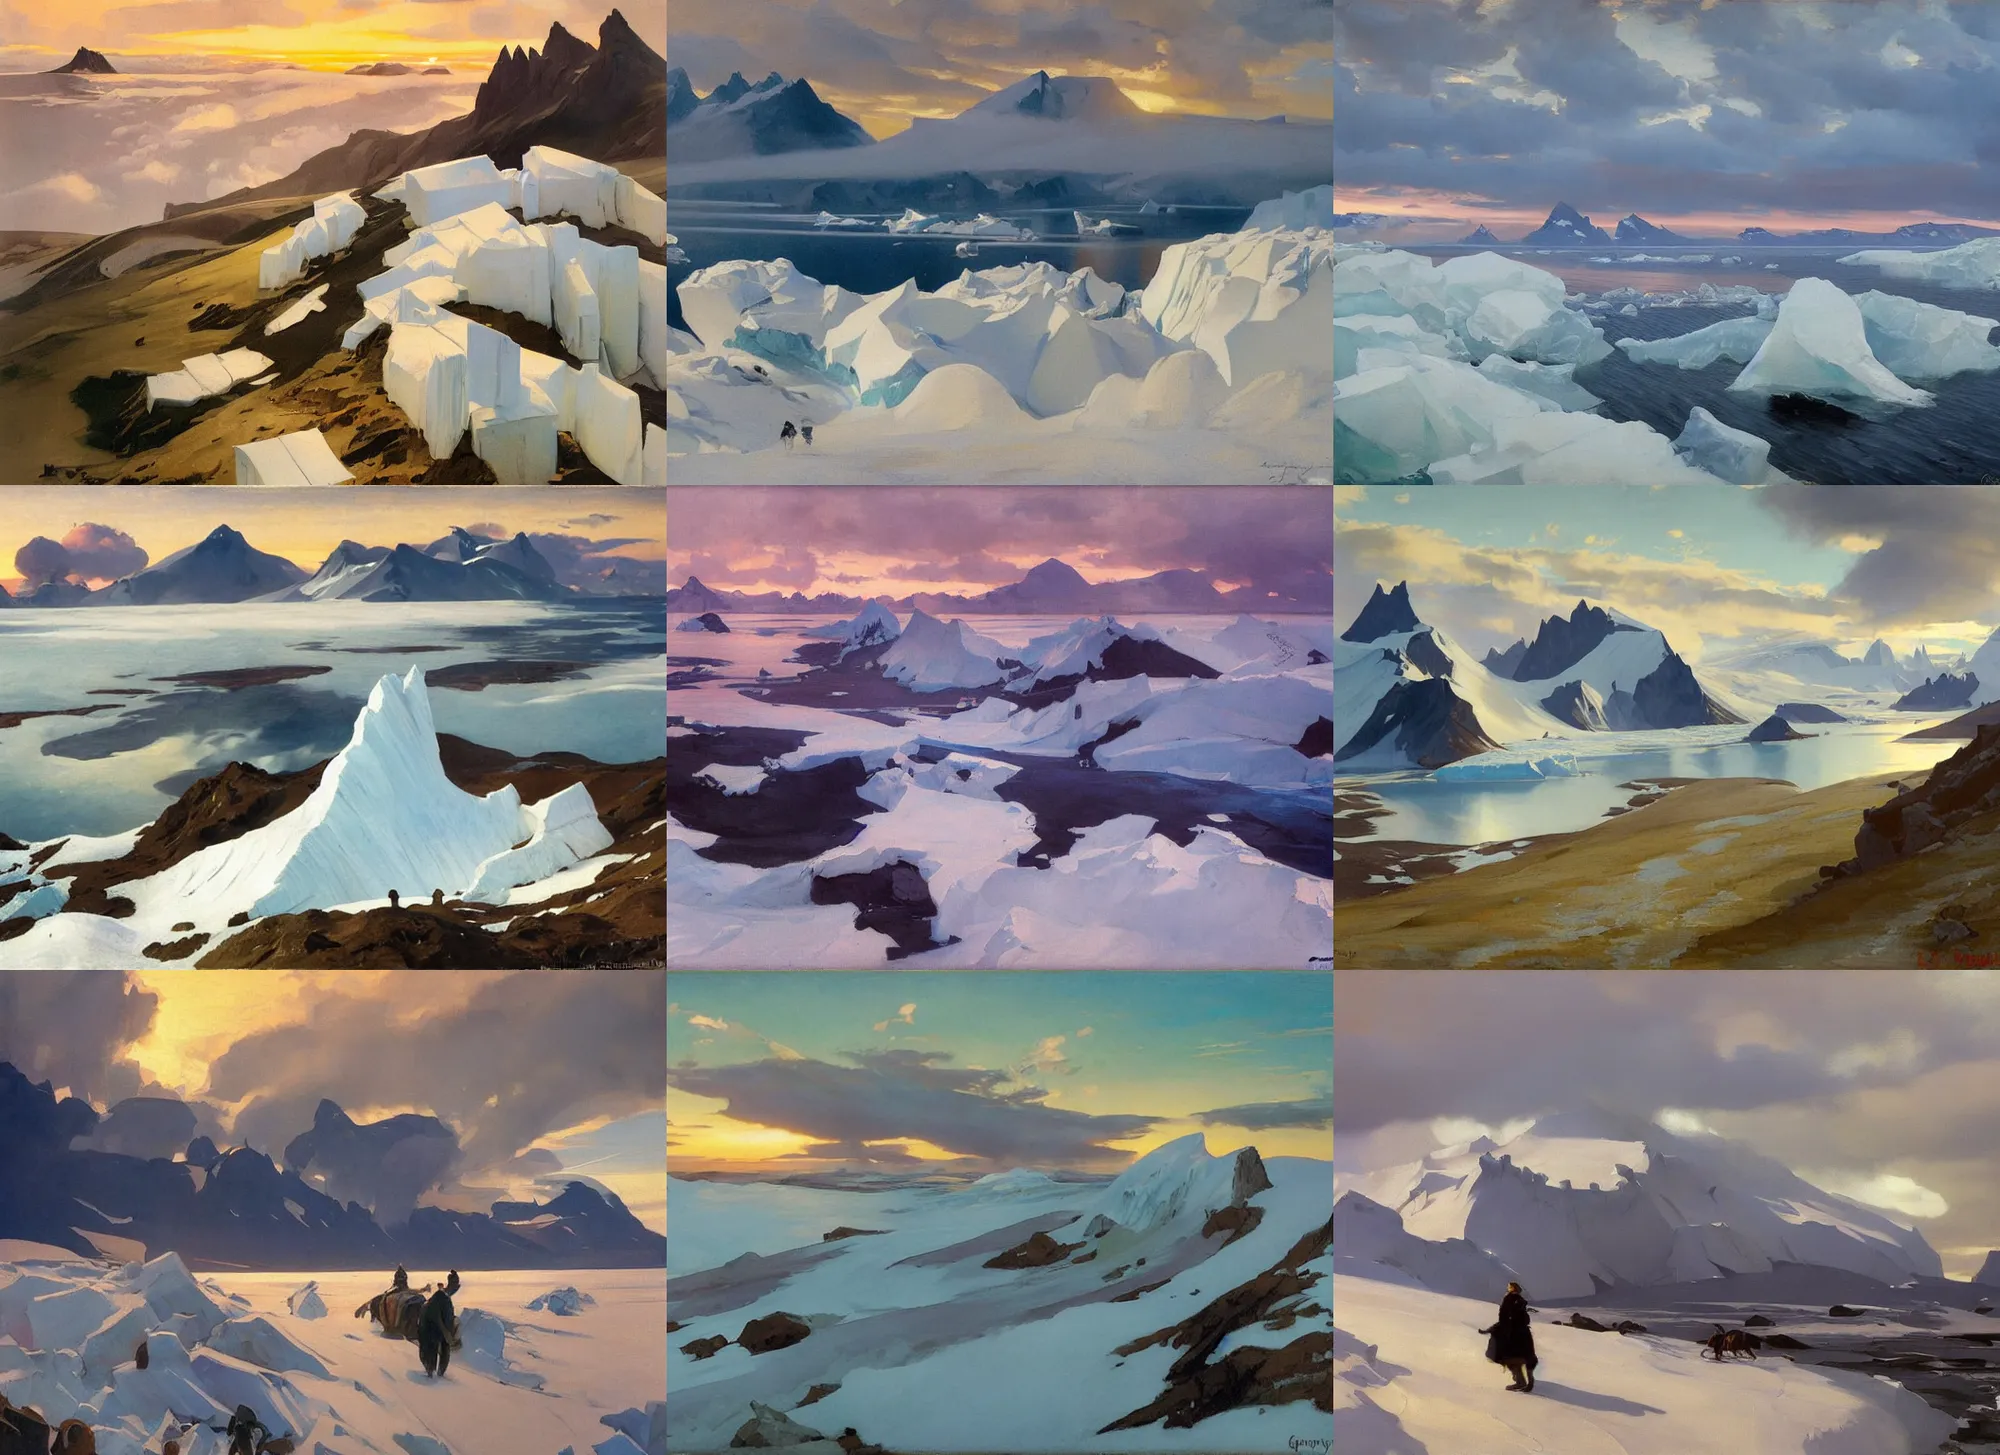 Prompt: painting by sargent leyendecker and gurney, rhads, vasnetsov, savrasov levitan polenov, middle ages, sunset sinrise, above the layered low clouds travel path road to sea bay view photo of greenland and iceland glacier and icebergs overcast sharpen details